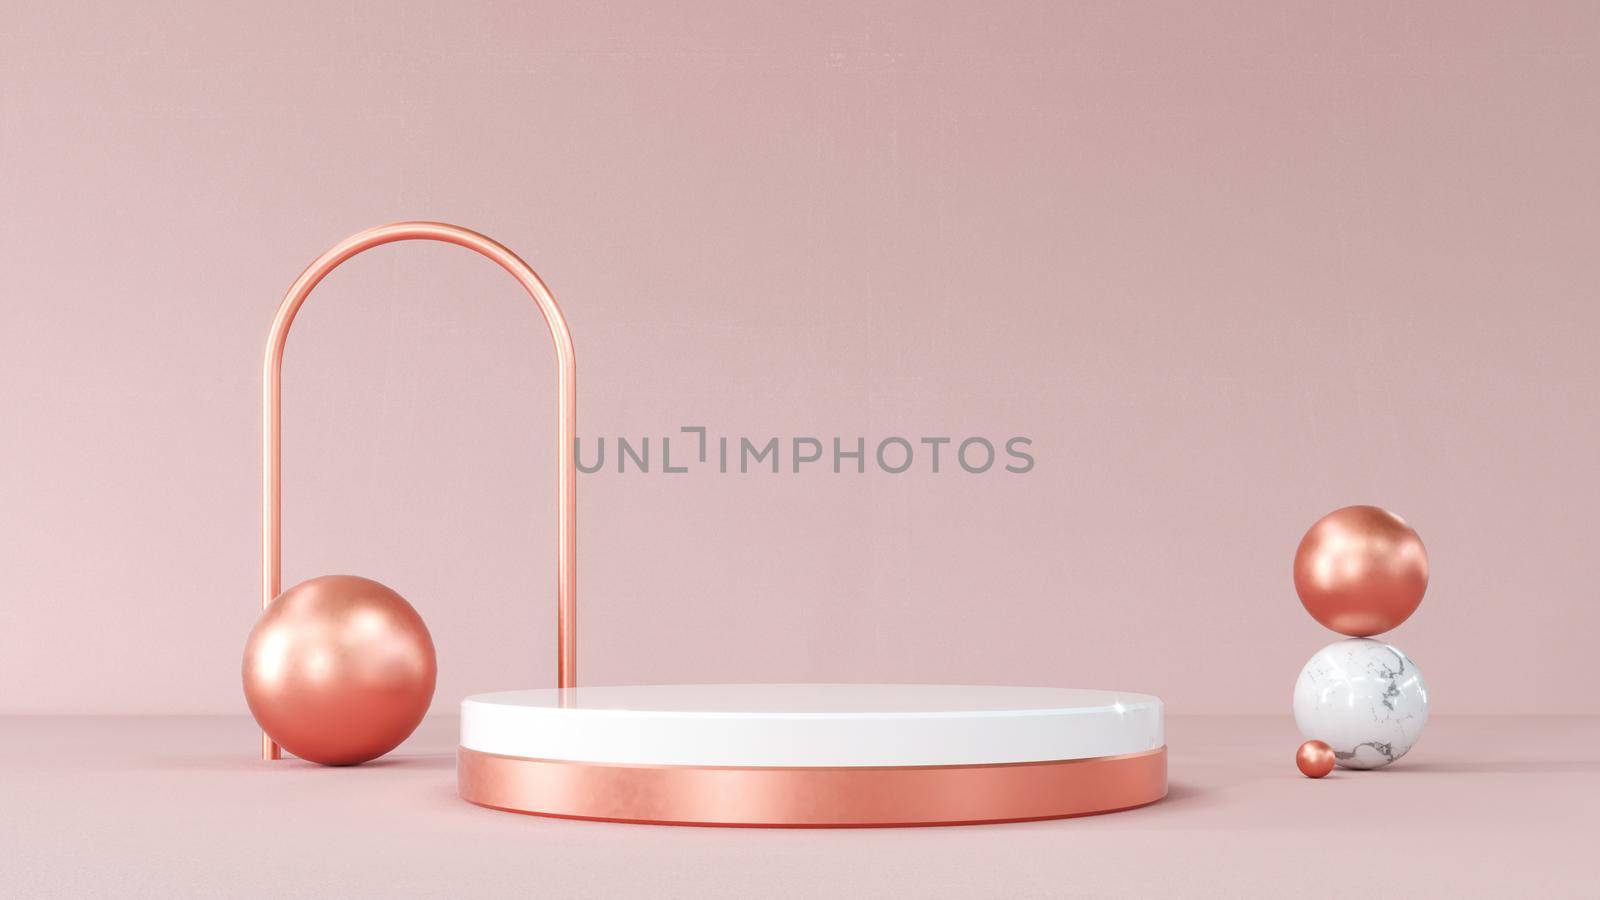 Composition with round scene.geometry with spheres. Abstract Pastel pink geometric shape blank platform. Podium empty showcase pedestal product display for cosmetic presentation. 3d Rendering.